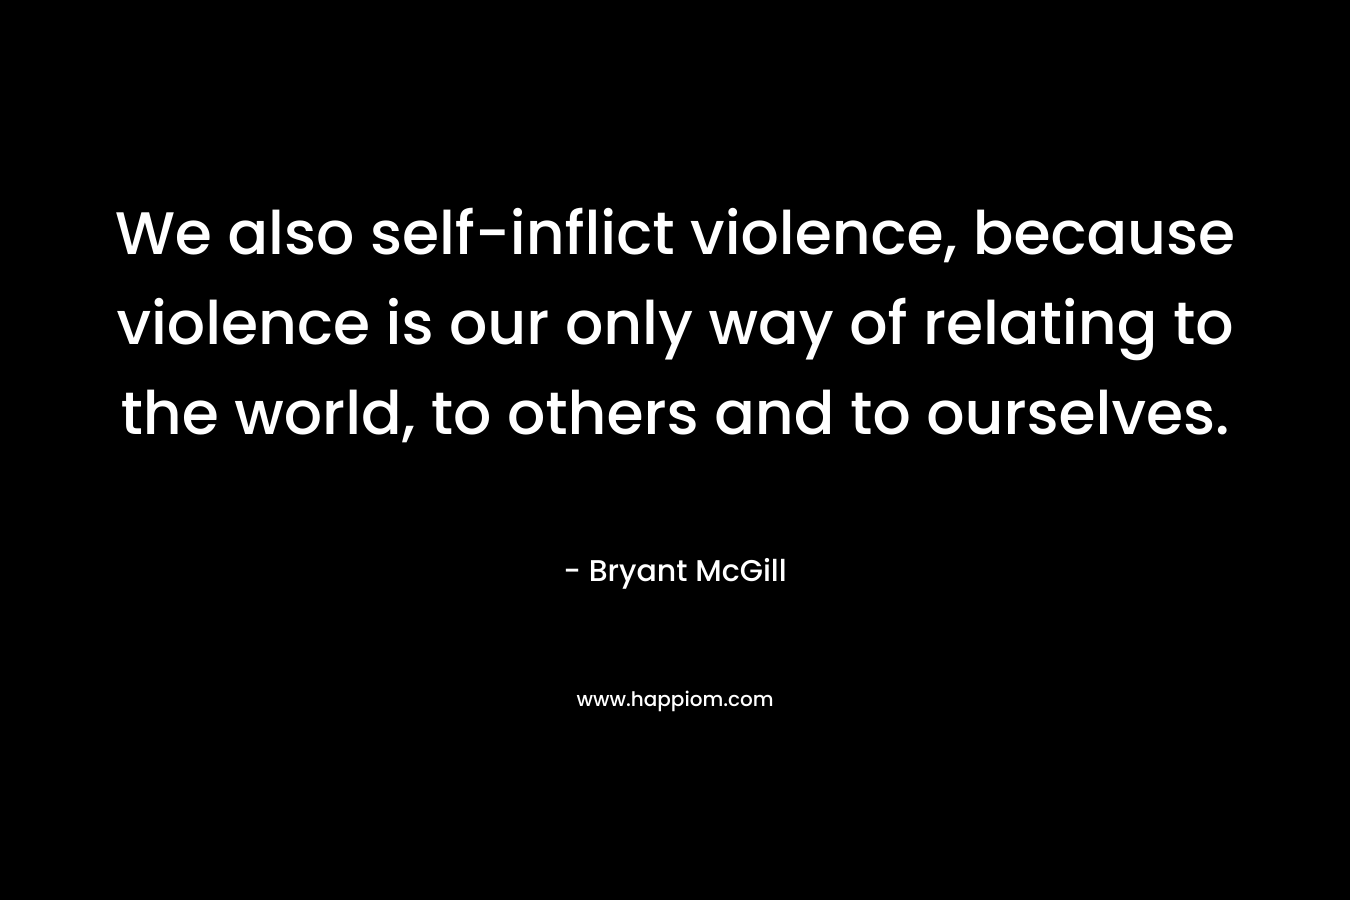 We also self-inflict violence, because violence is our only way of relating to the world, to others and to ourselves.